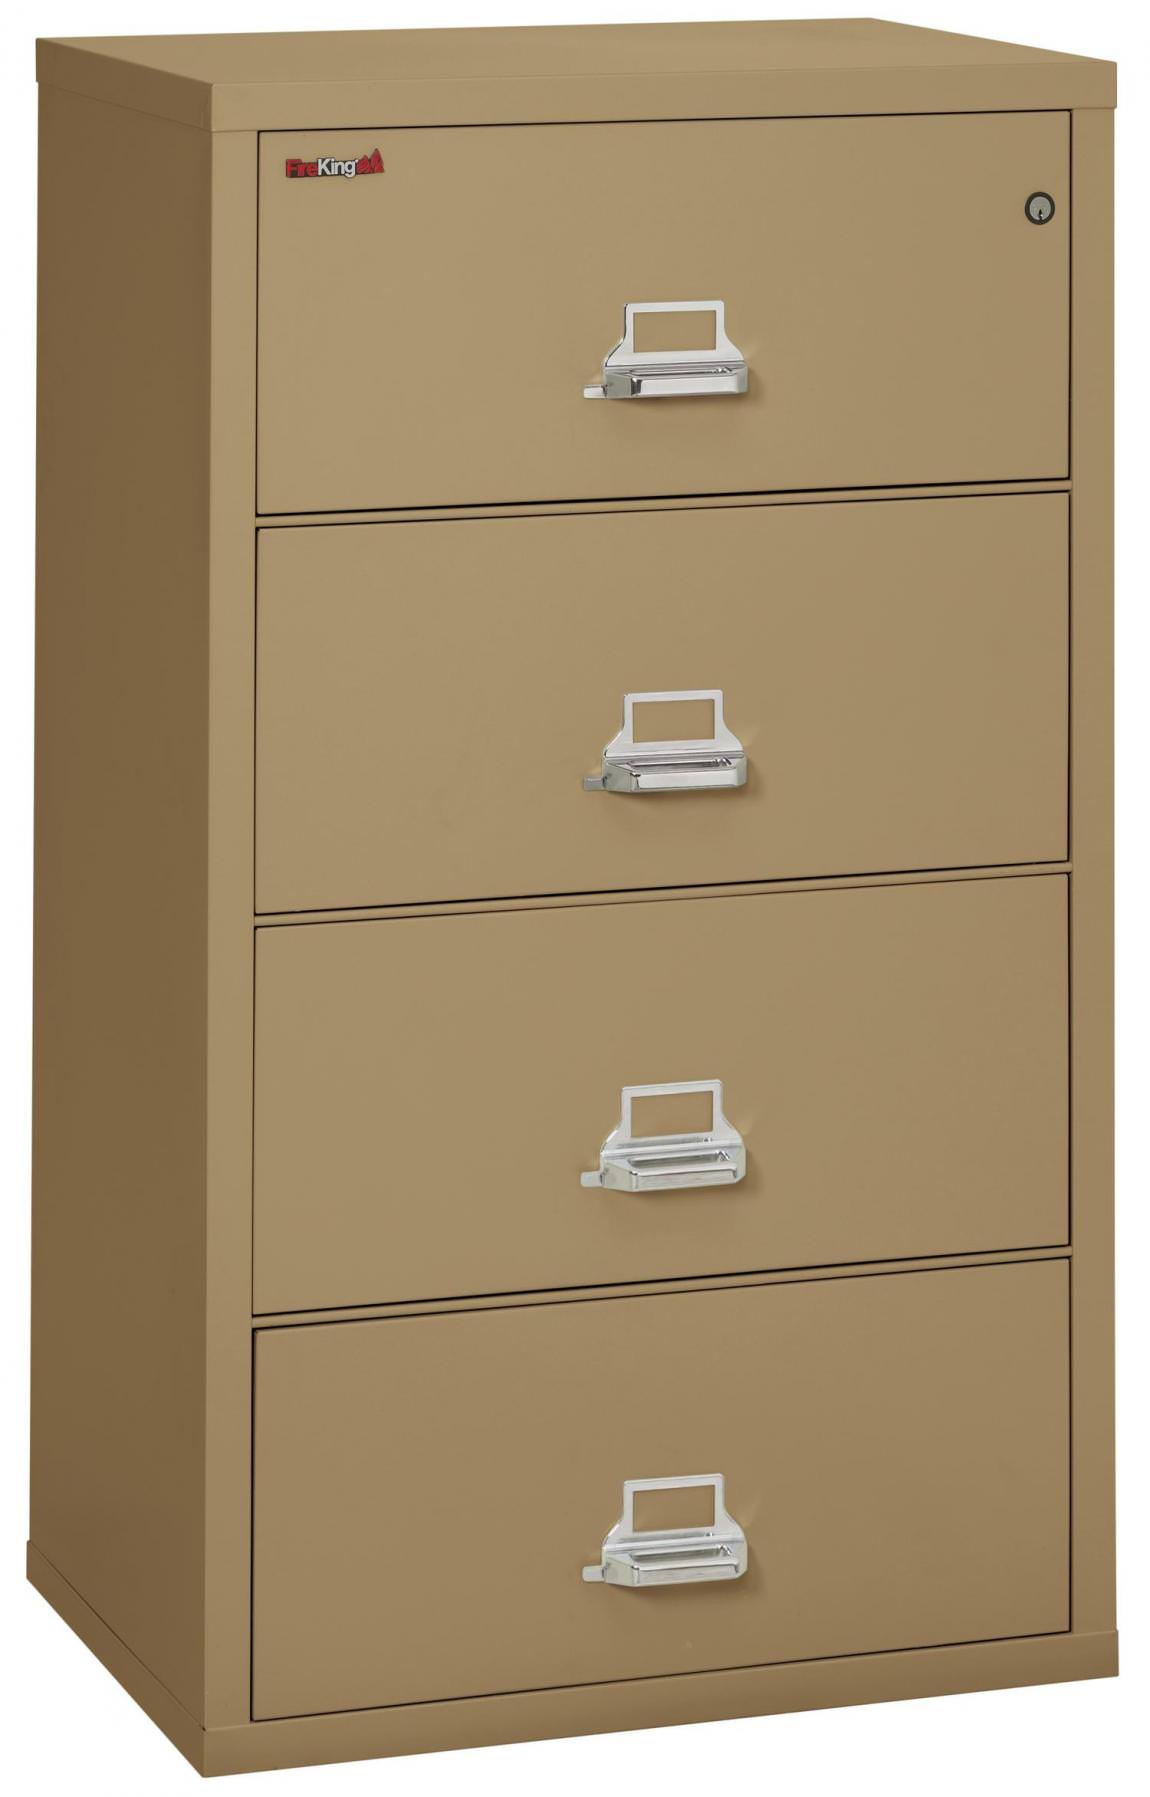 4 Drawer Fireproof Lateral File Cabinet - 31 Inch